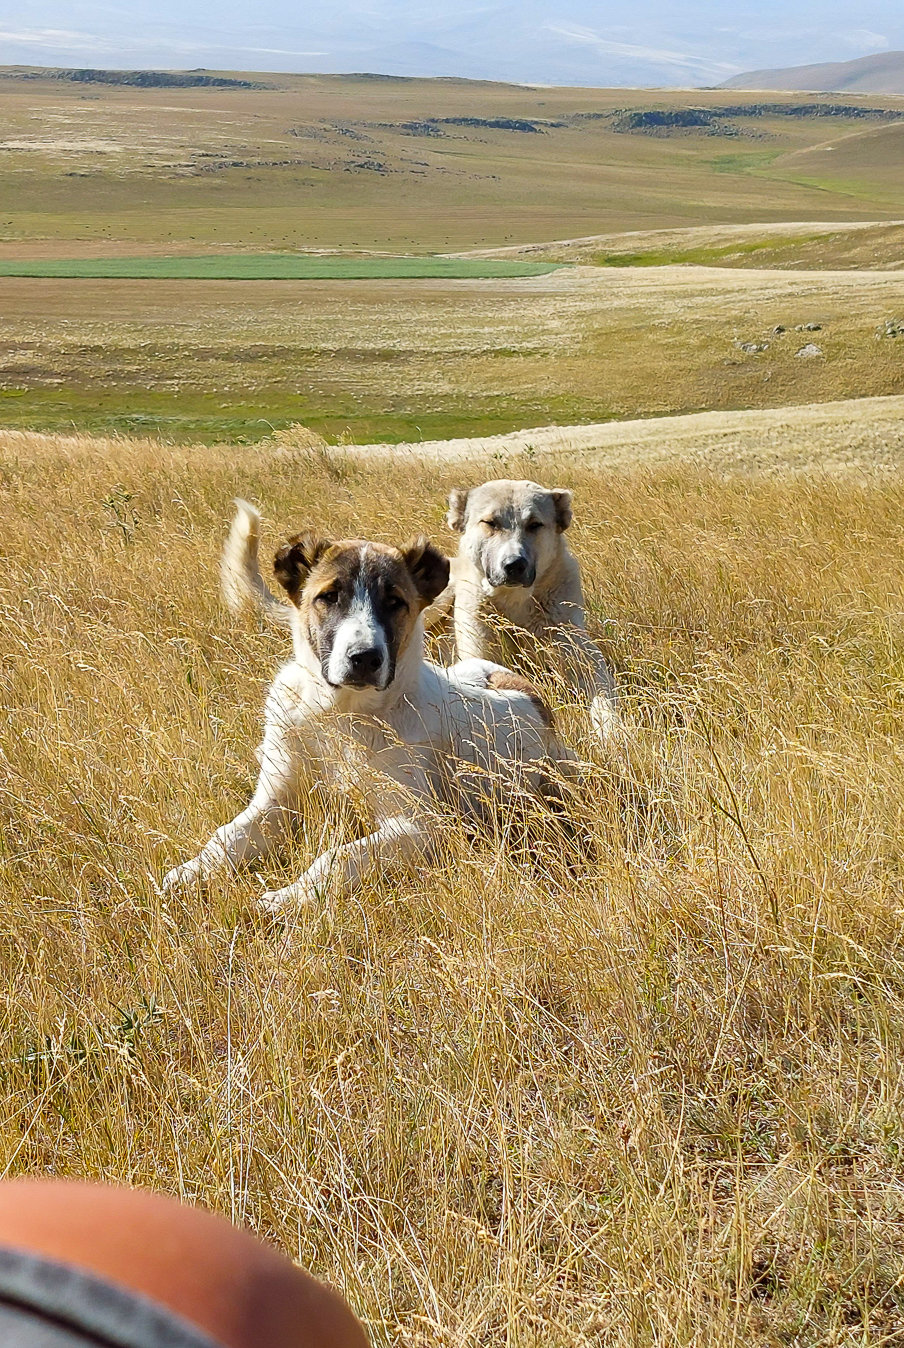 <span  class="uc_style_uc_tiles_grid_image_elementor_uc_items_attribute_title" style="color:#ffffff;">An Armenian shepherd left his 2 dogs to protect us during the day, or maybe just for our fun.  ..great (and impressive) pals</span>